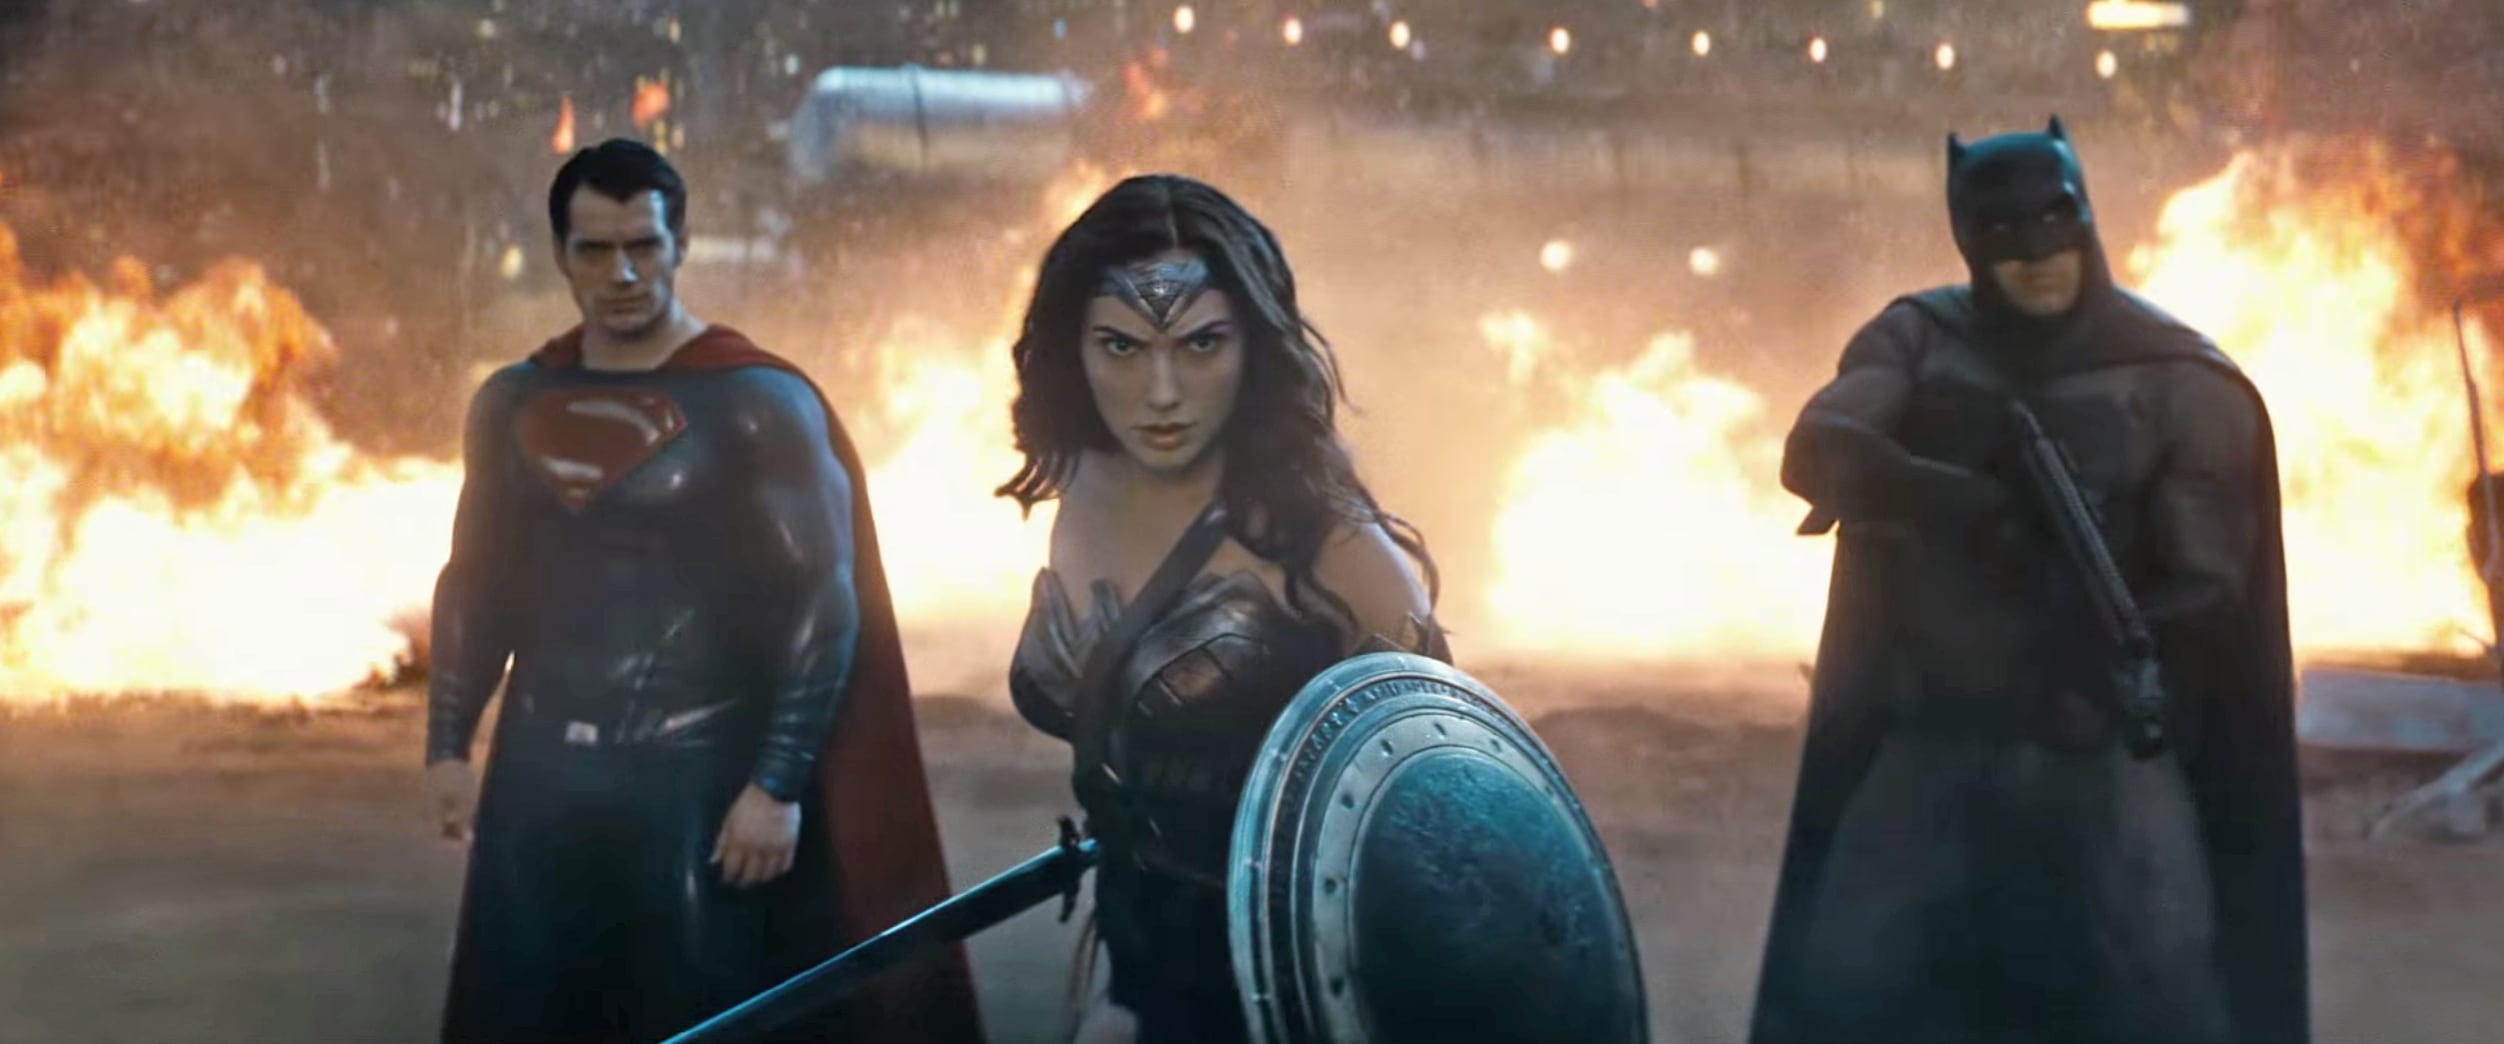 Superman finally arrives: New Justice League photo shows Henry Cavill  leading the DC heroes